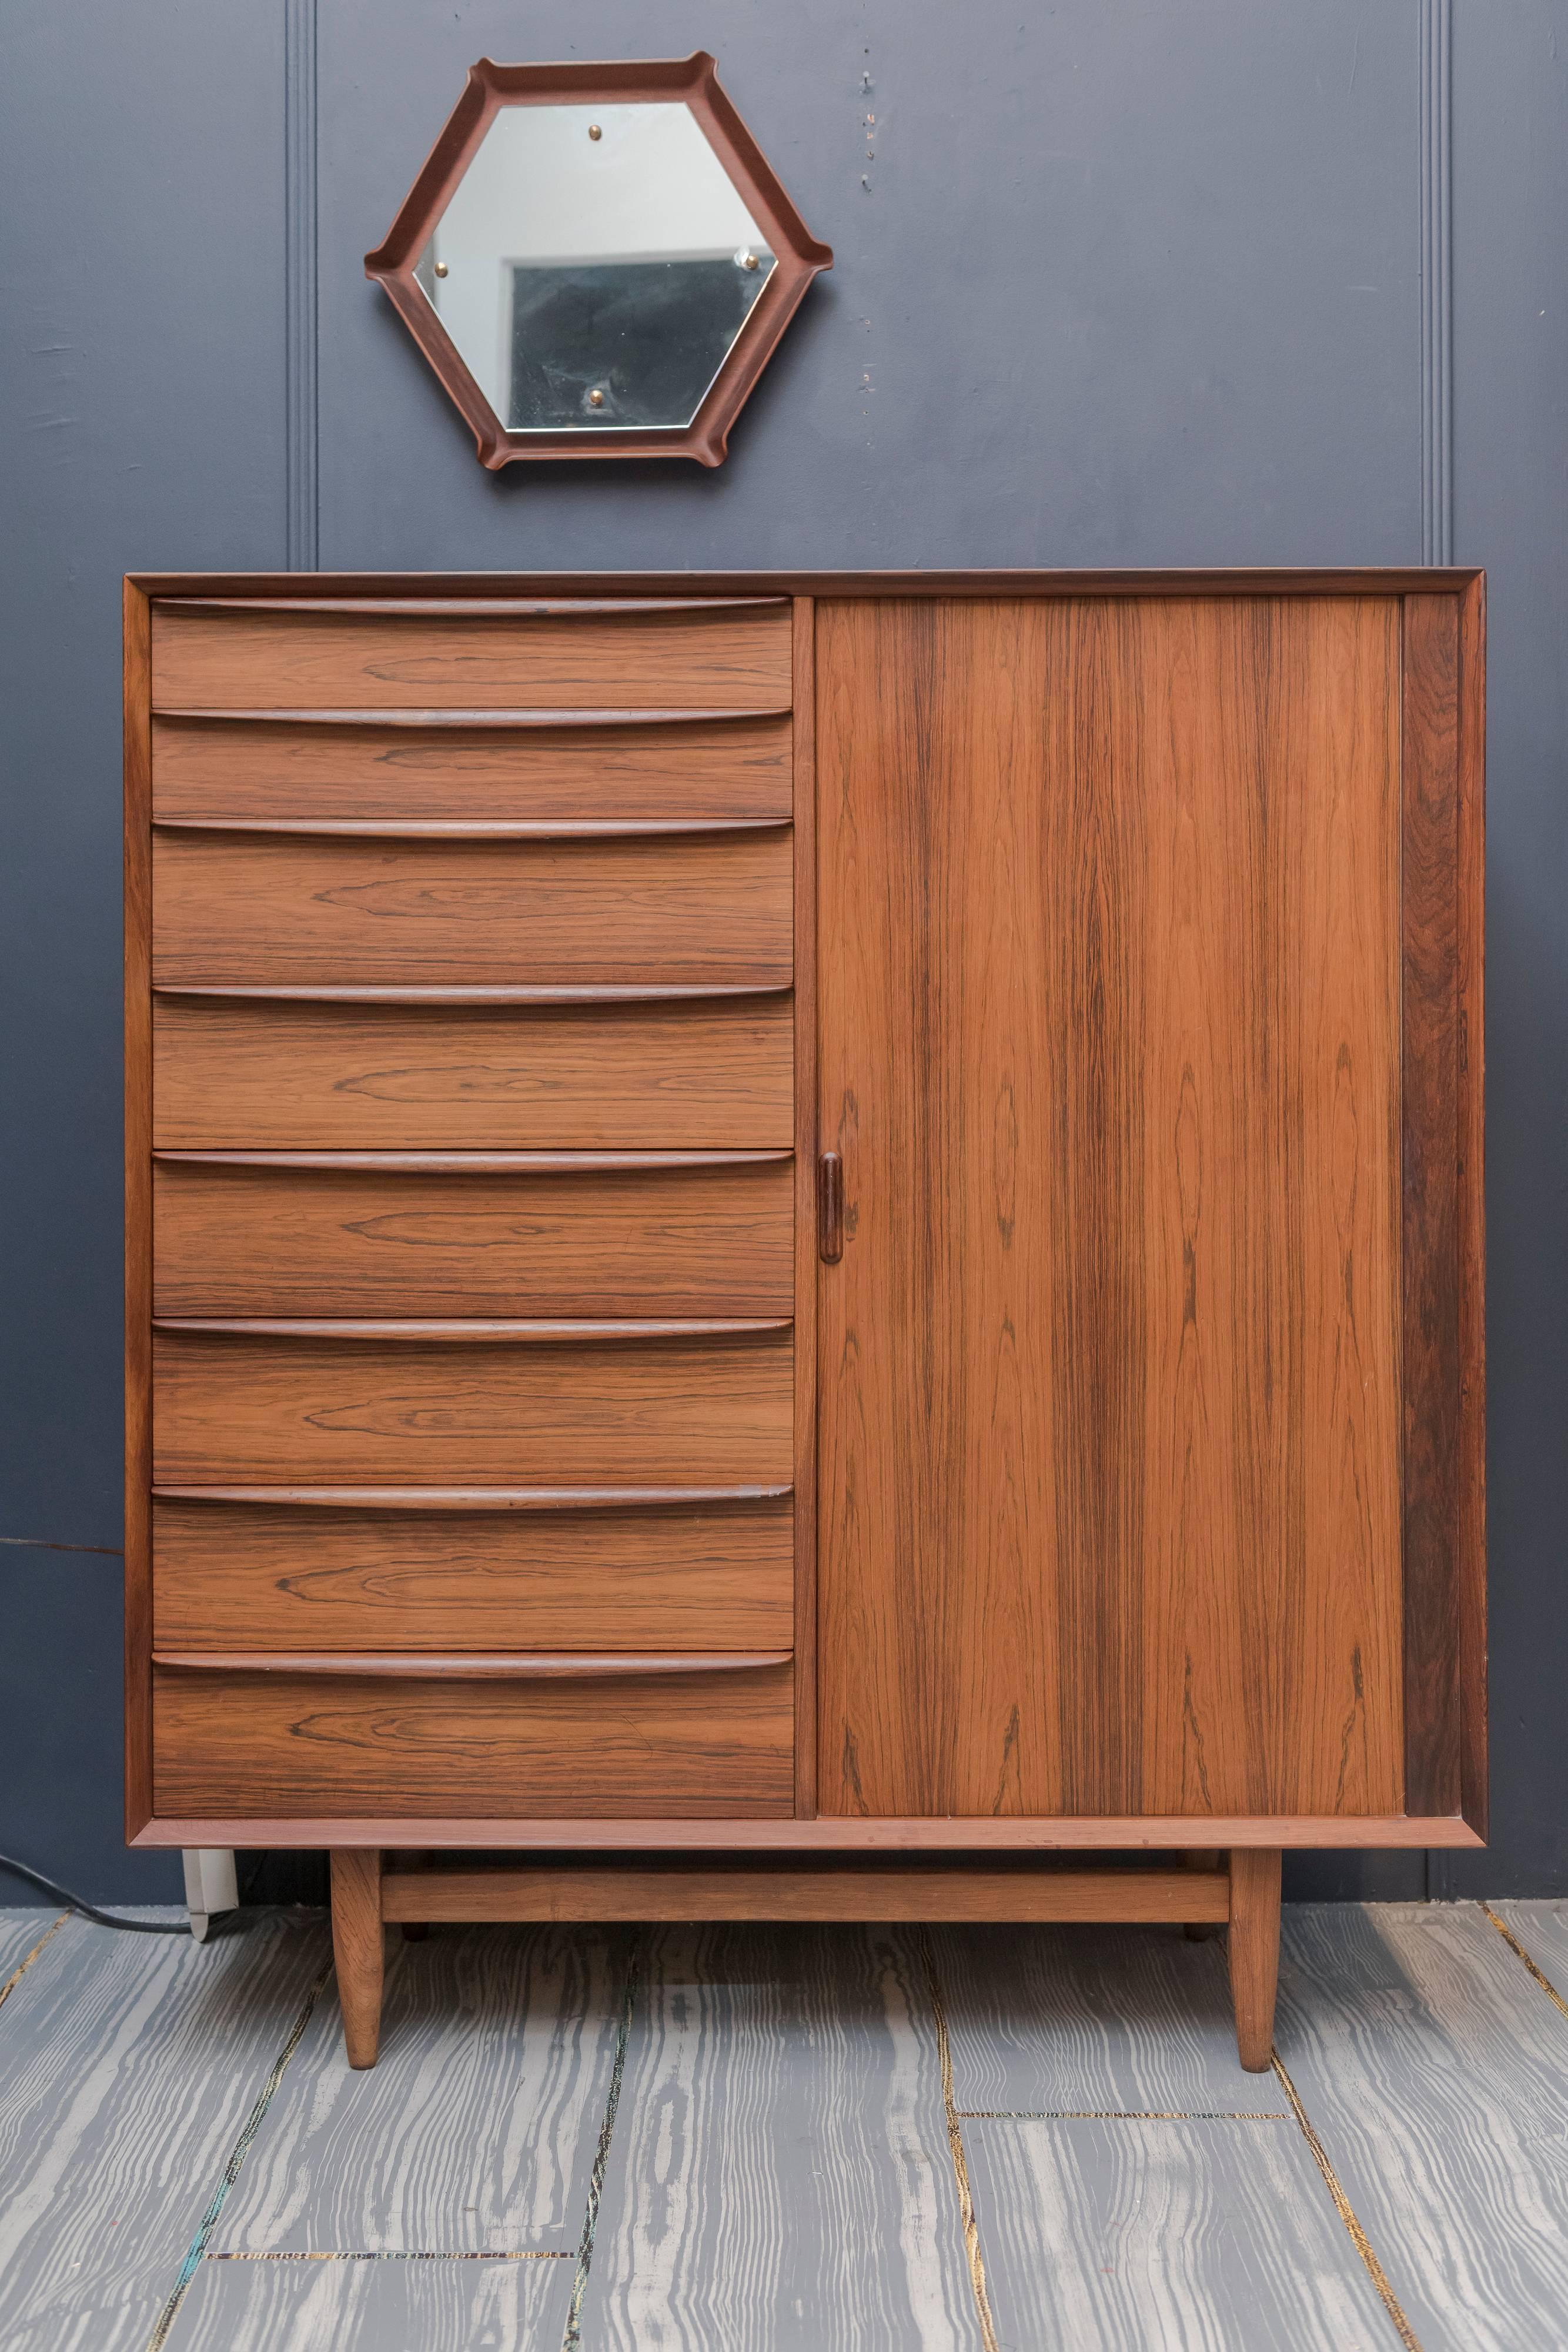 High quality design and construction tall dresser by Falster, Denmark. Comprising eight drawers with a tambor door concealing nine interior drawers. In good vintage condition with age appropriate wear and use.